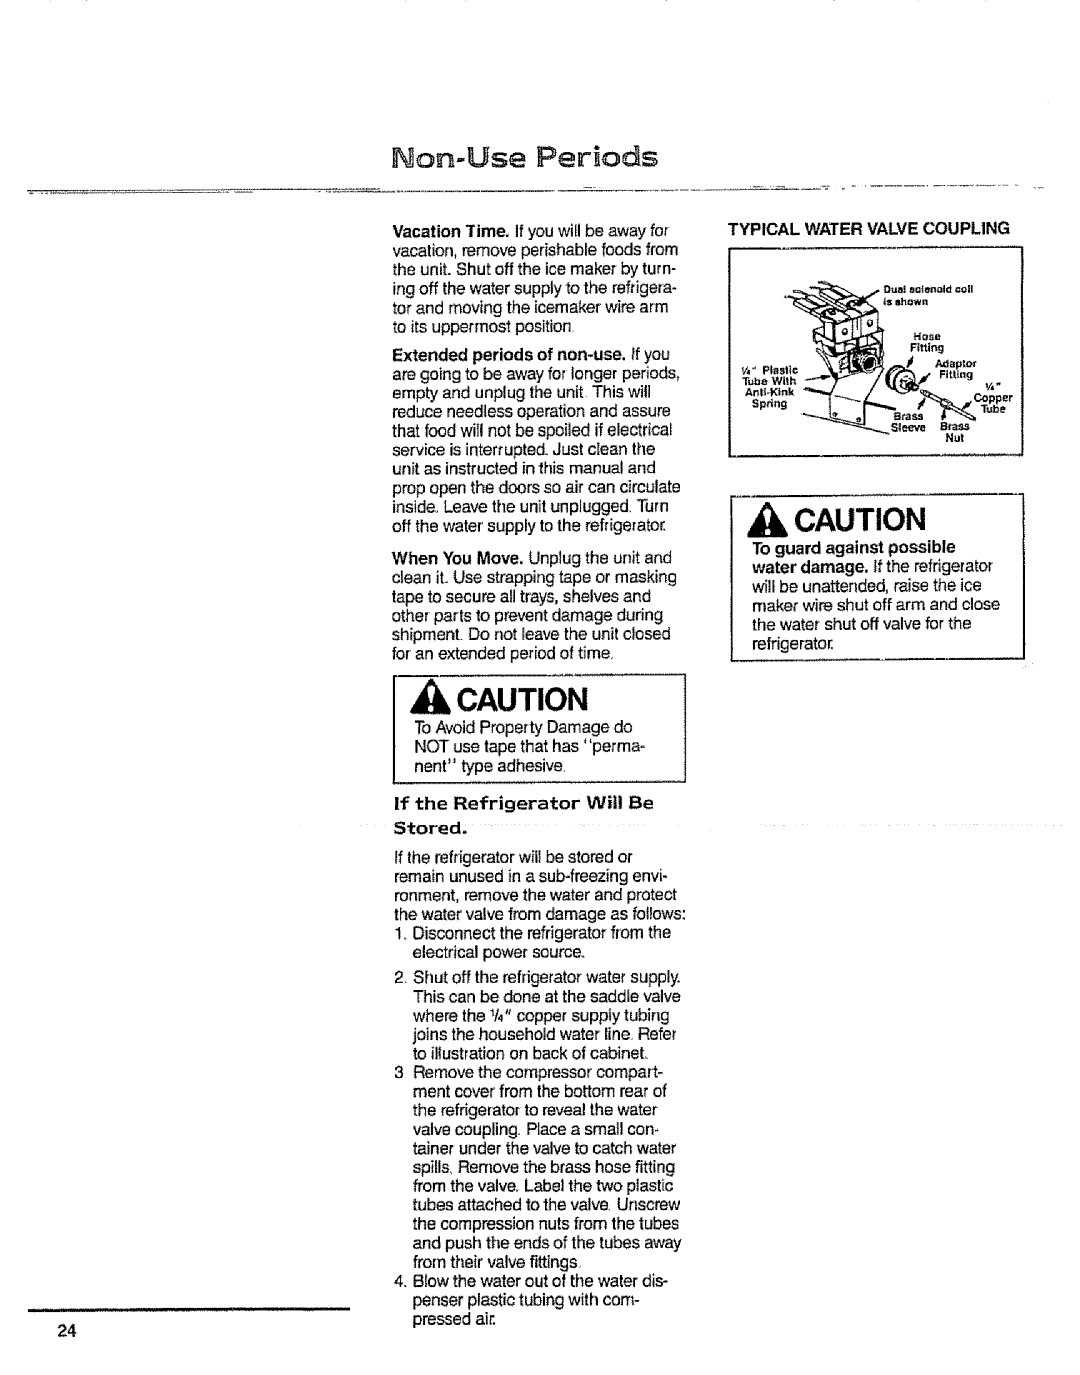 Sears 10062603 manual Non-UsePeriods, Extended periods of non-use, If you, if the Refrigerator Will Be Stored 